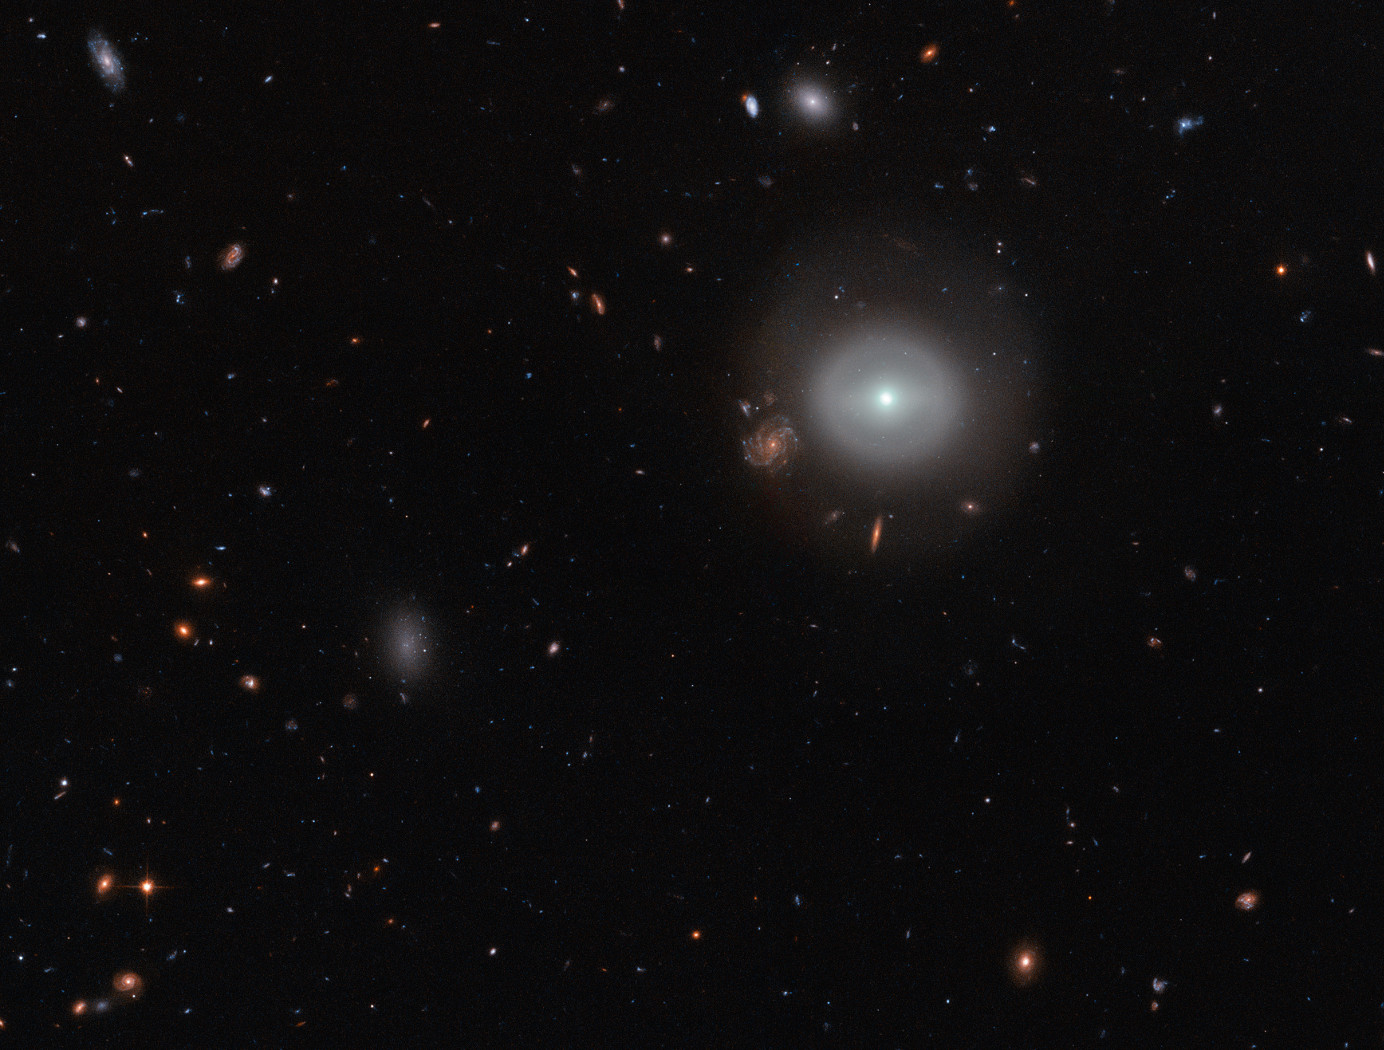 Hubble Finds a Lenticular Galaxy Standing Out in the Crowd
Credit: NASA/ESA/Hubble; acknowledgements: Judy Schmidt (Geckzilla)